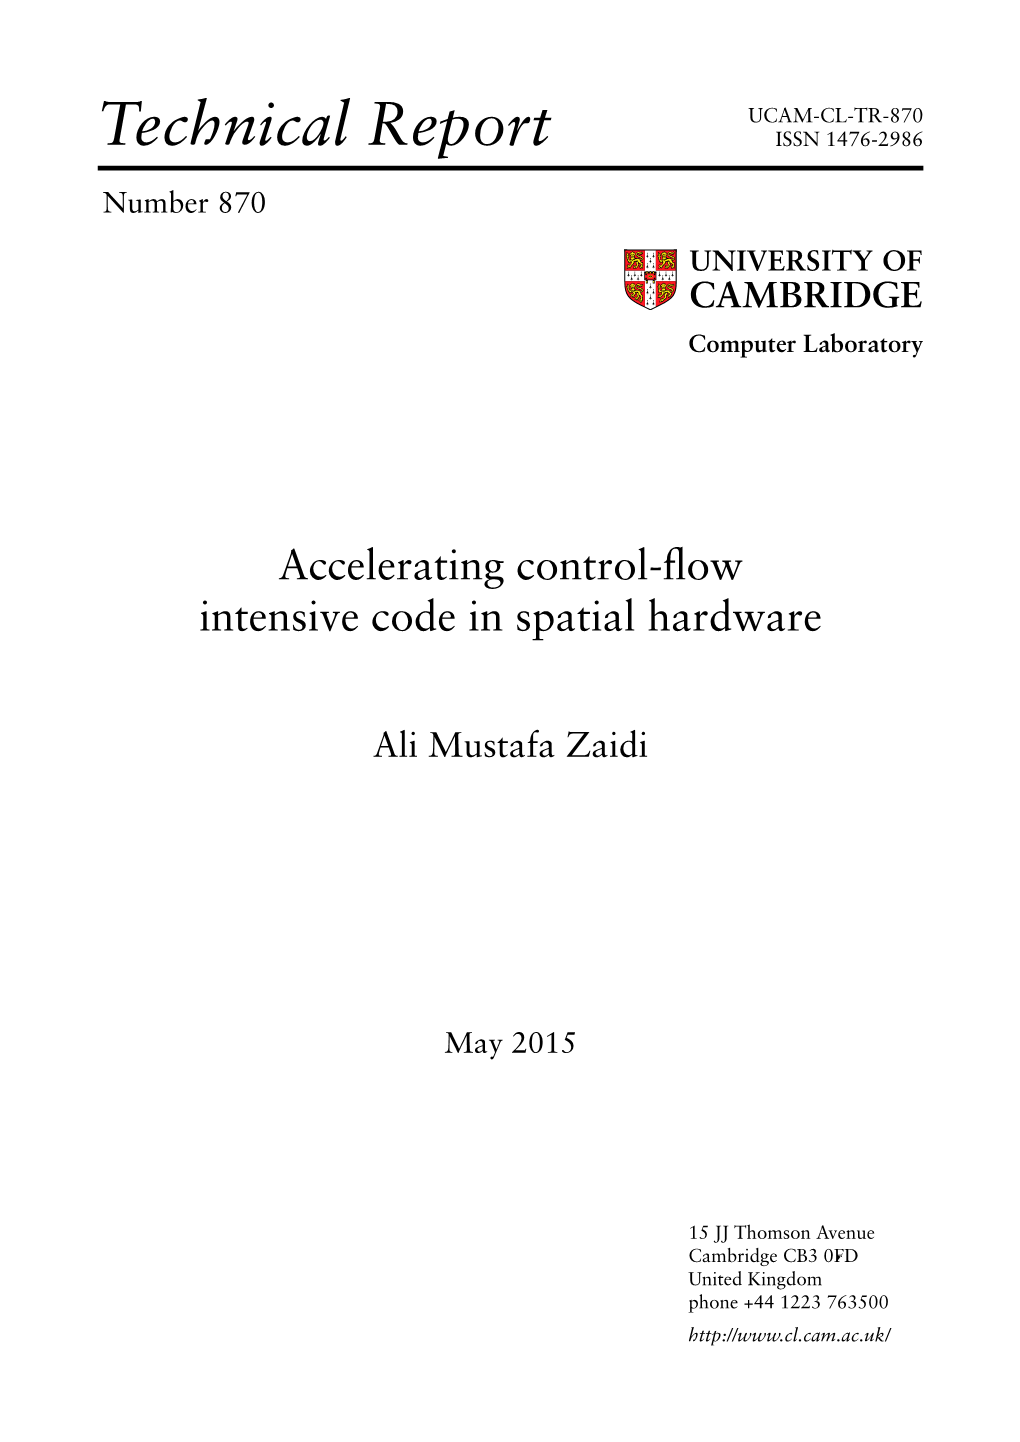 Accelerating Control-Flow Intensive Code in Spatial Hardware